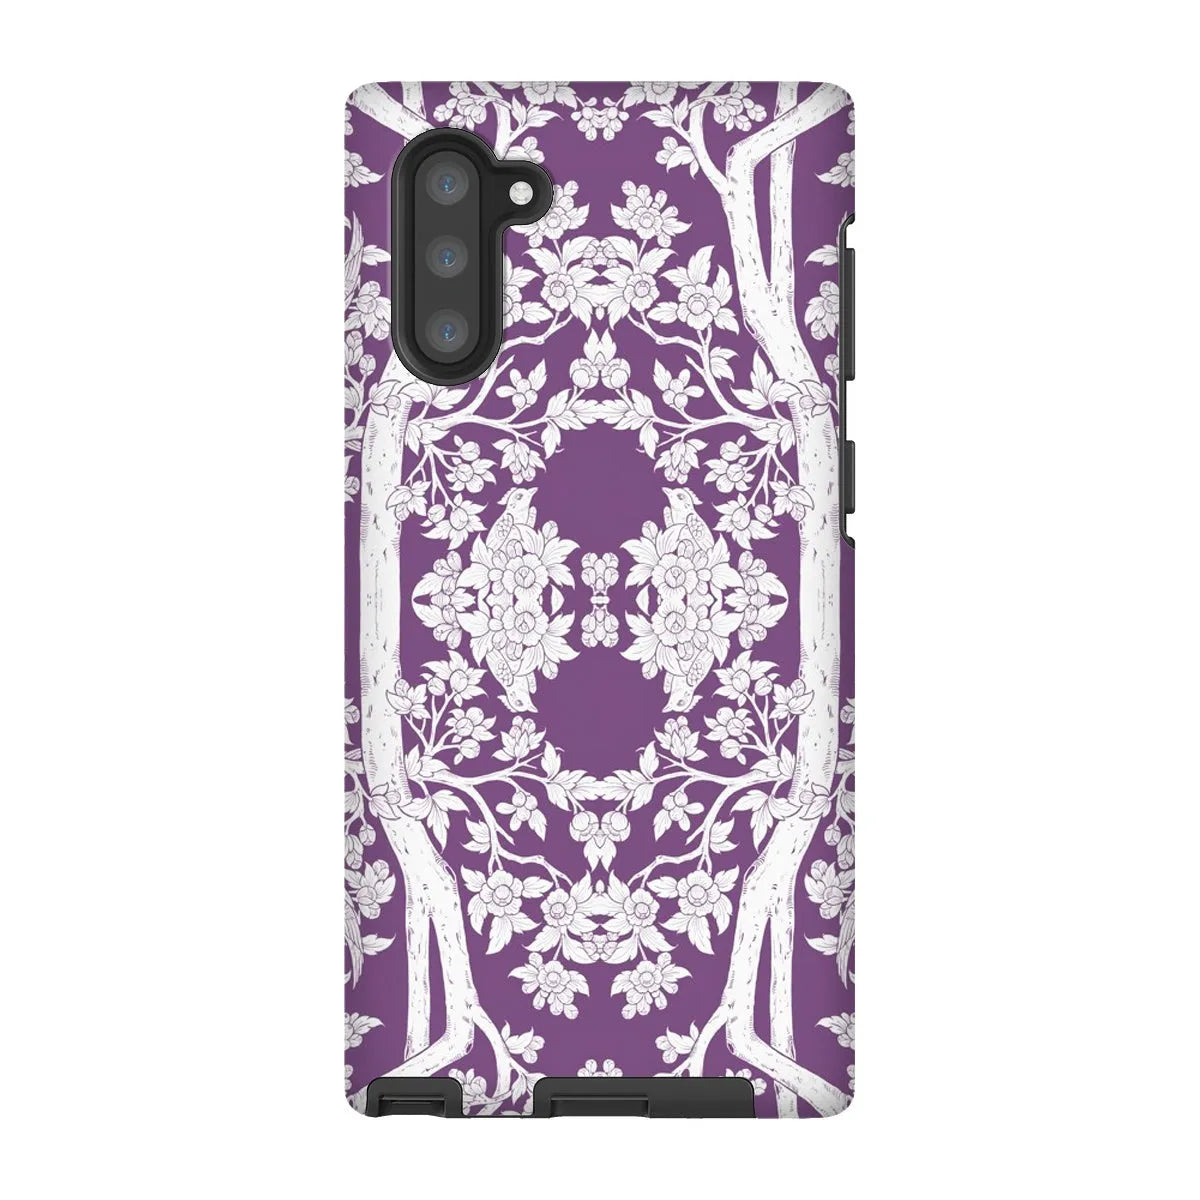 Aviary Purple Aesthetic Pattern Art Phone Case - Samsung Galaxy Note 10 / Matte - Mobile Phone Cases - Aesthetic Art